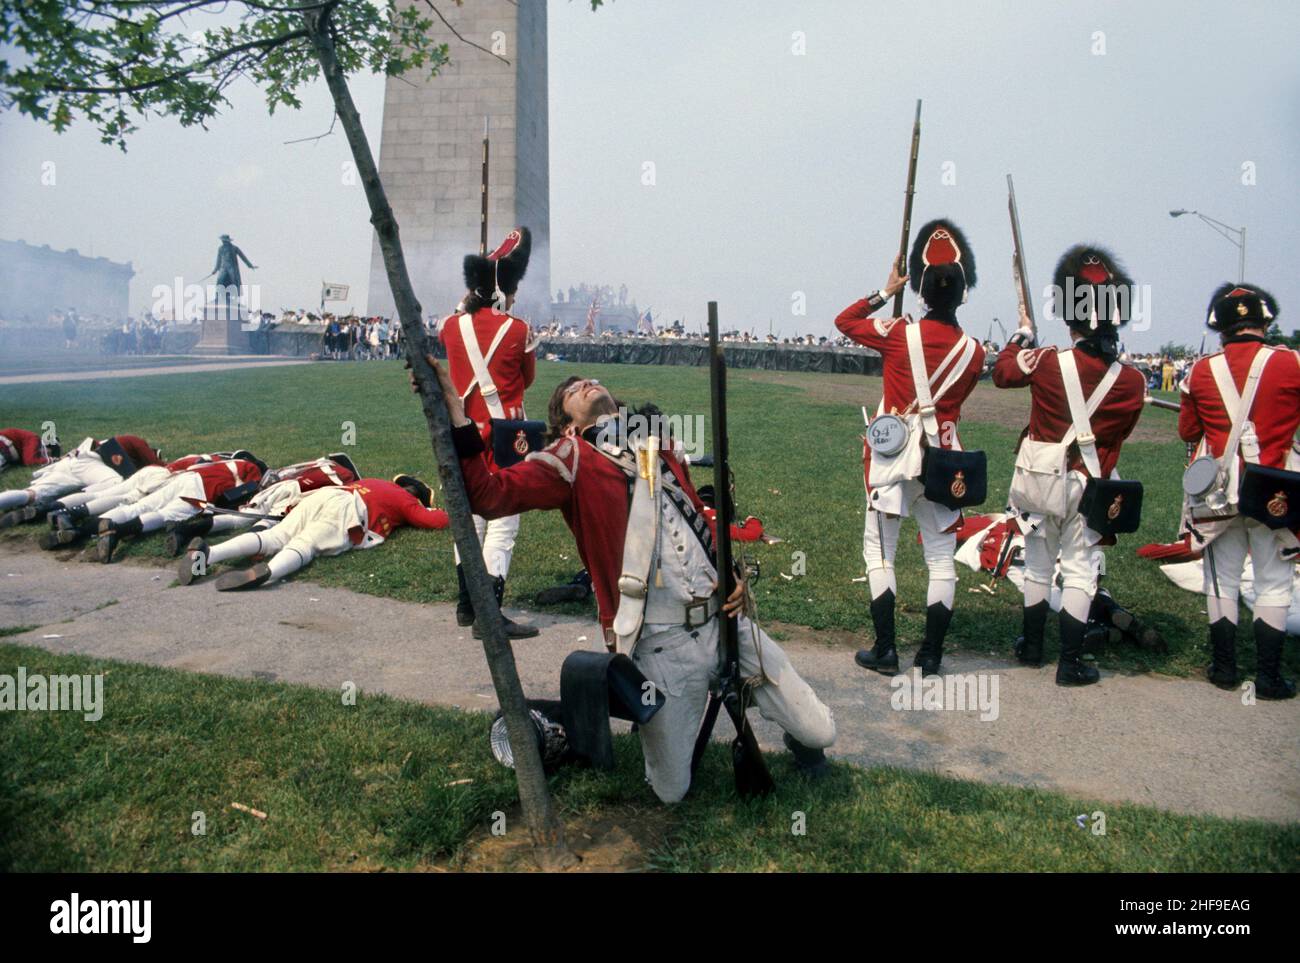 Uniformed volunteer actors stage a reenactment of the American Revolution Battle of Bunker Hill at the original location in Charlestown, MA. Stock Photo